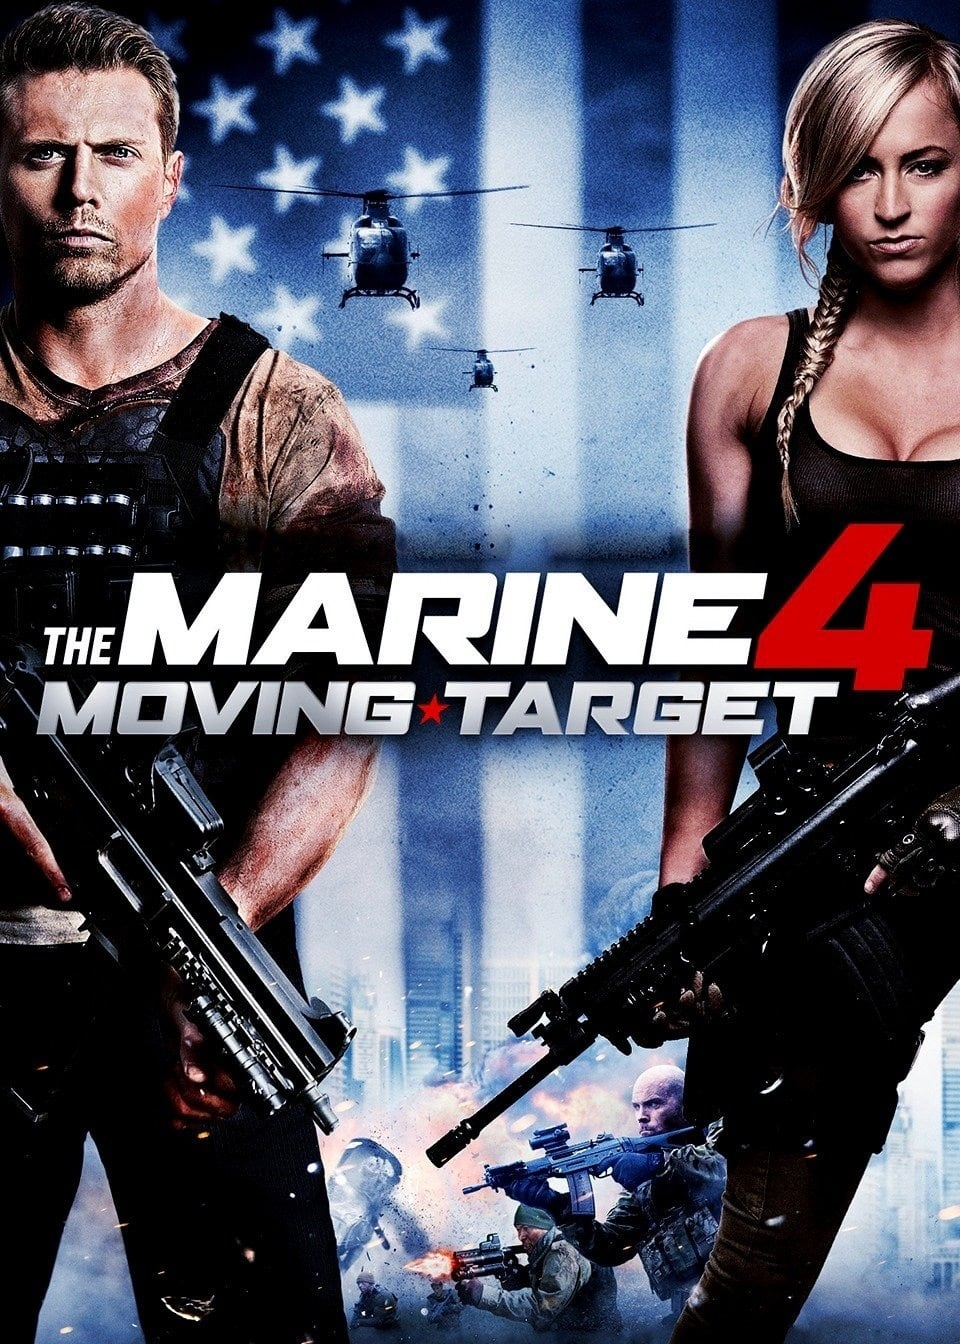 Poster Phim The Marine 4: Moving Target (The Marine 4: Moving Target)